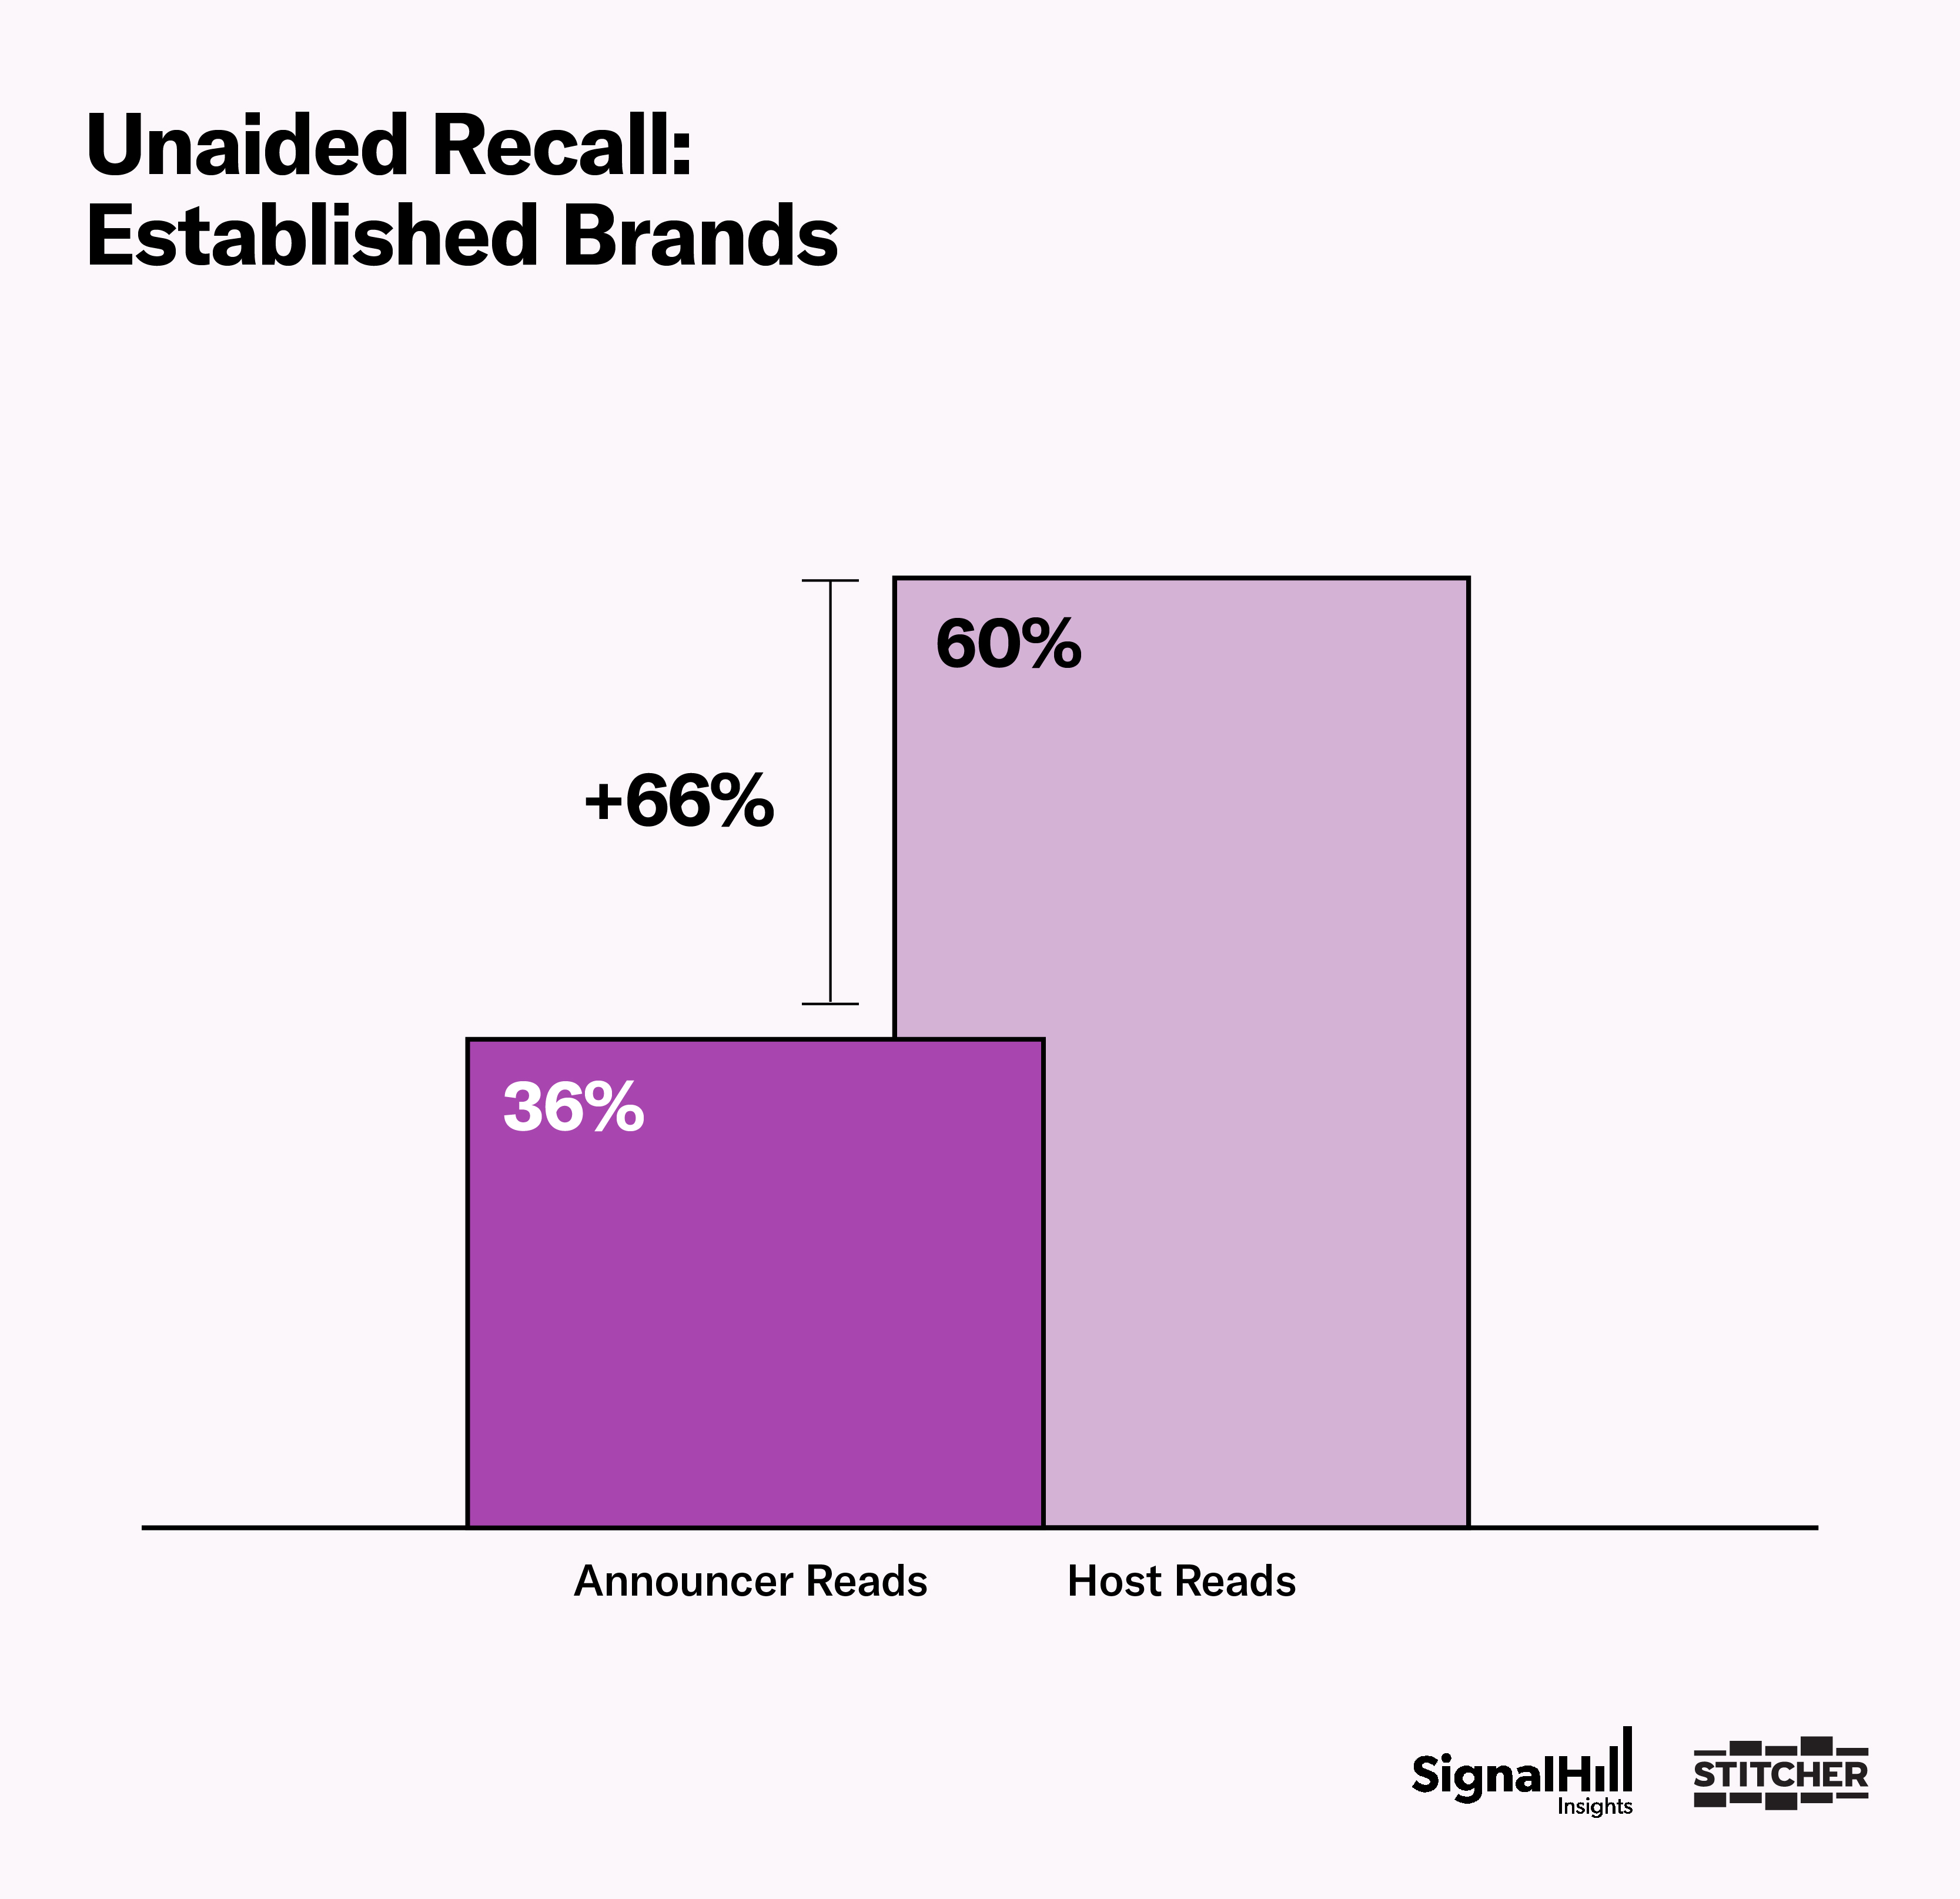 Unaided recall for established brands with host reads